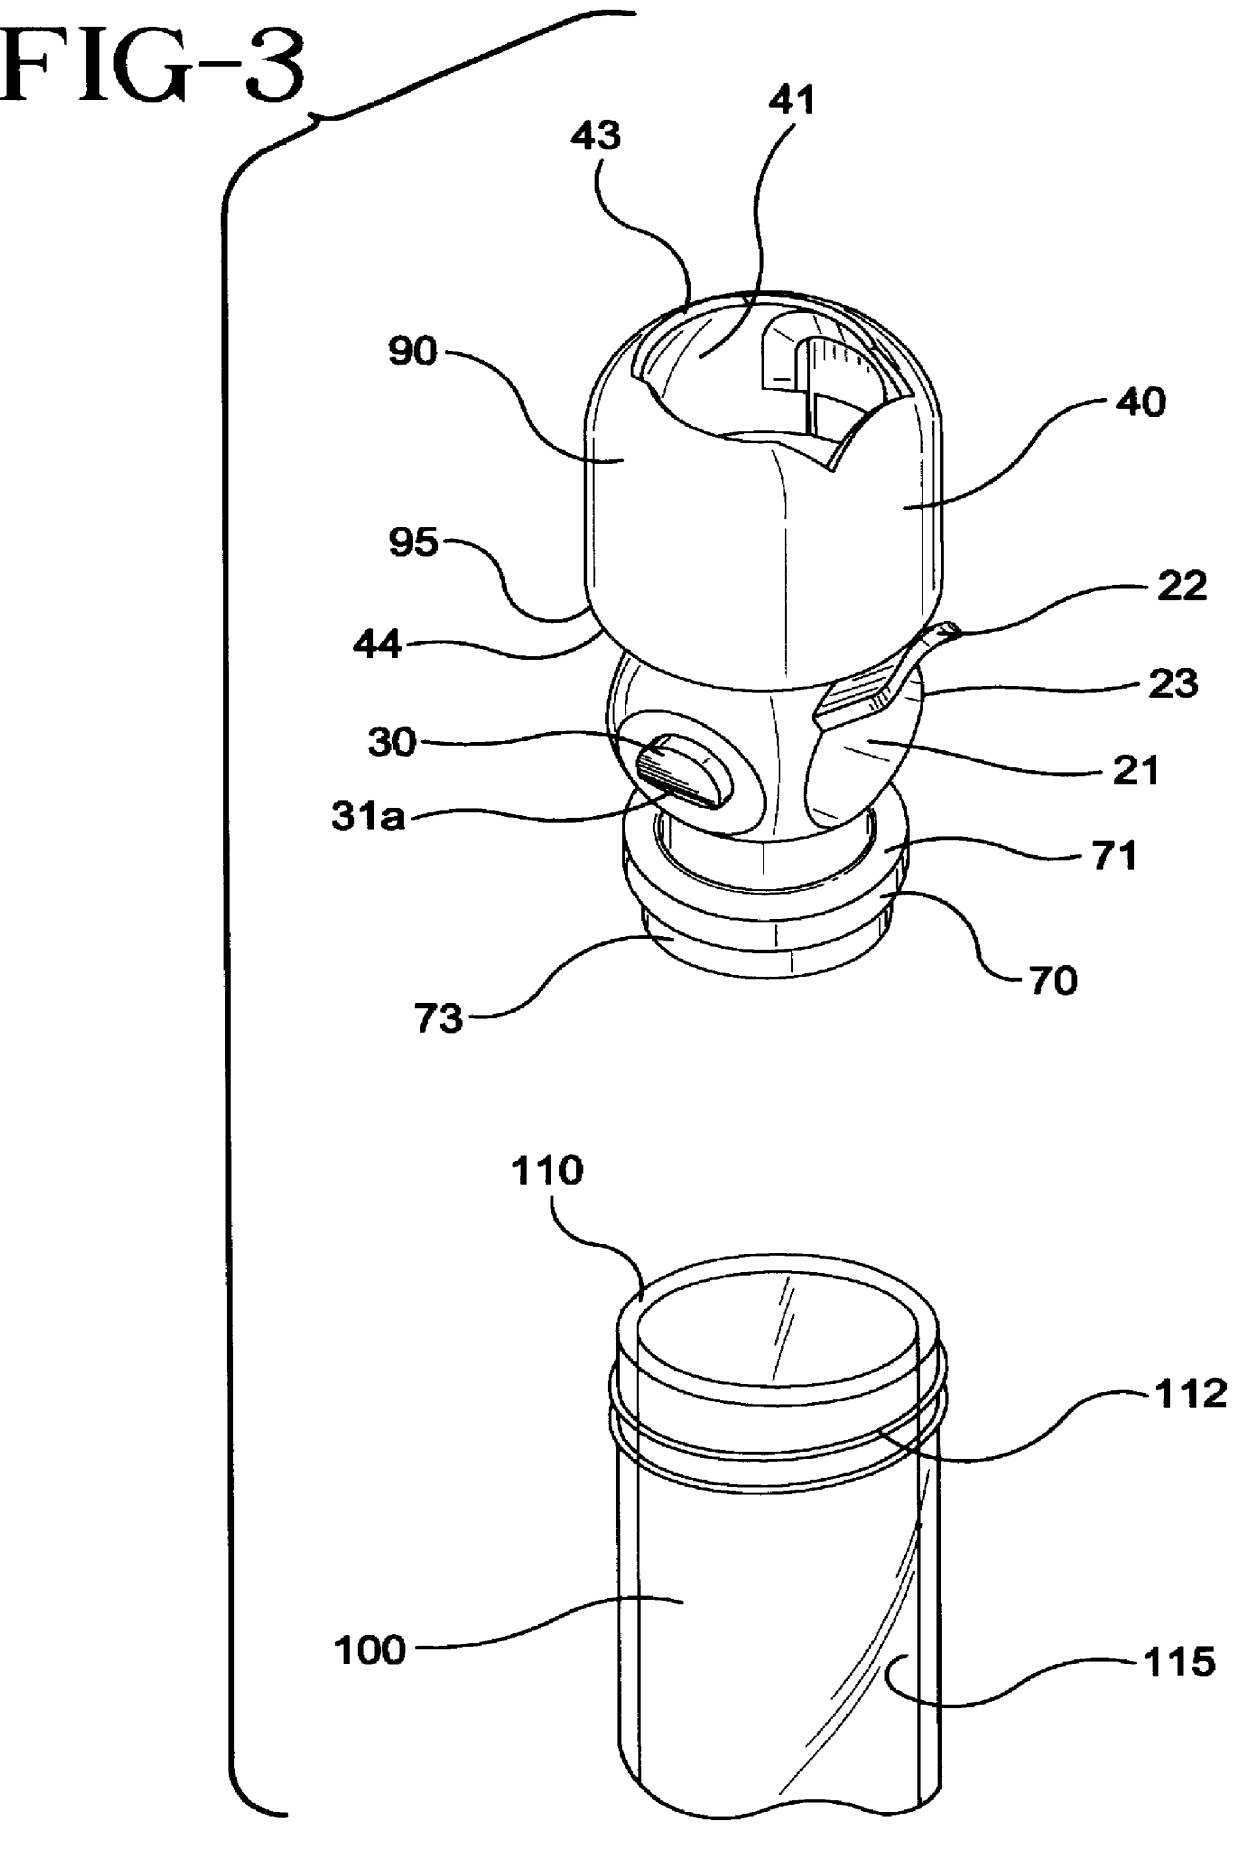 Ball and socket closure for specimen collection container incorporating a resilient elastomeric seal